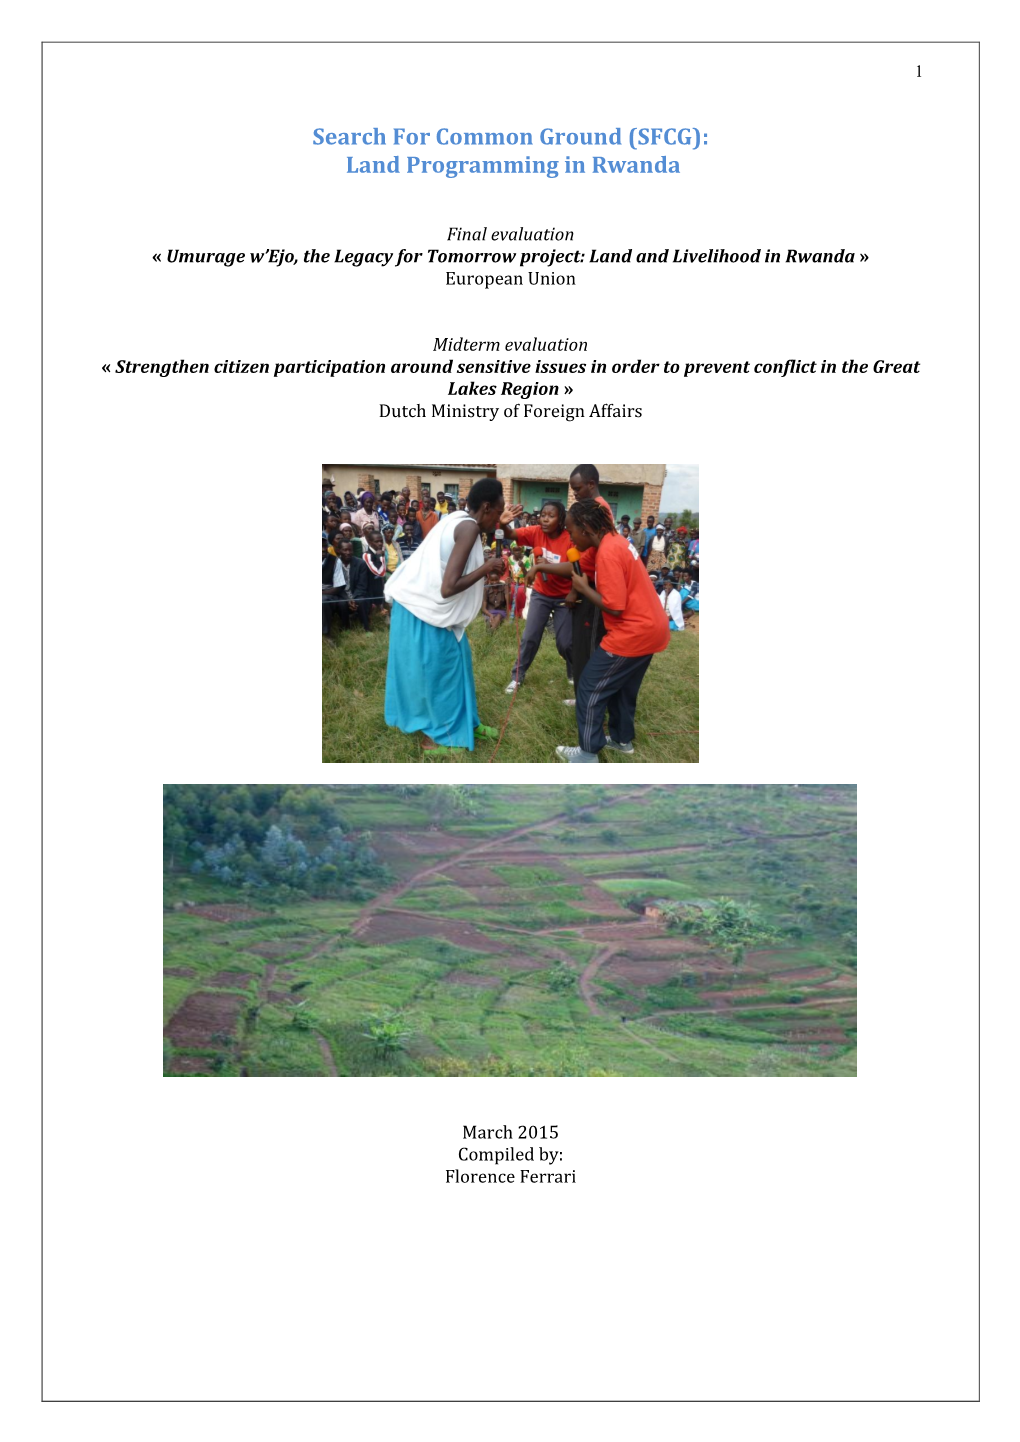 Search for Common Ground (SFCG): Land Programming in Rwanda